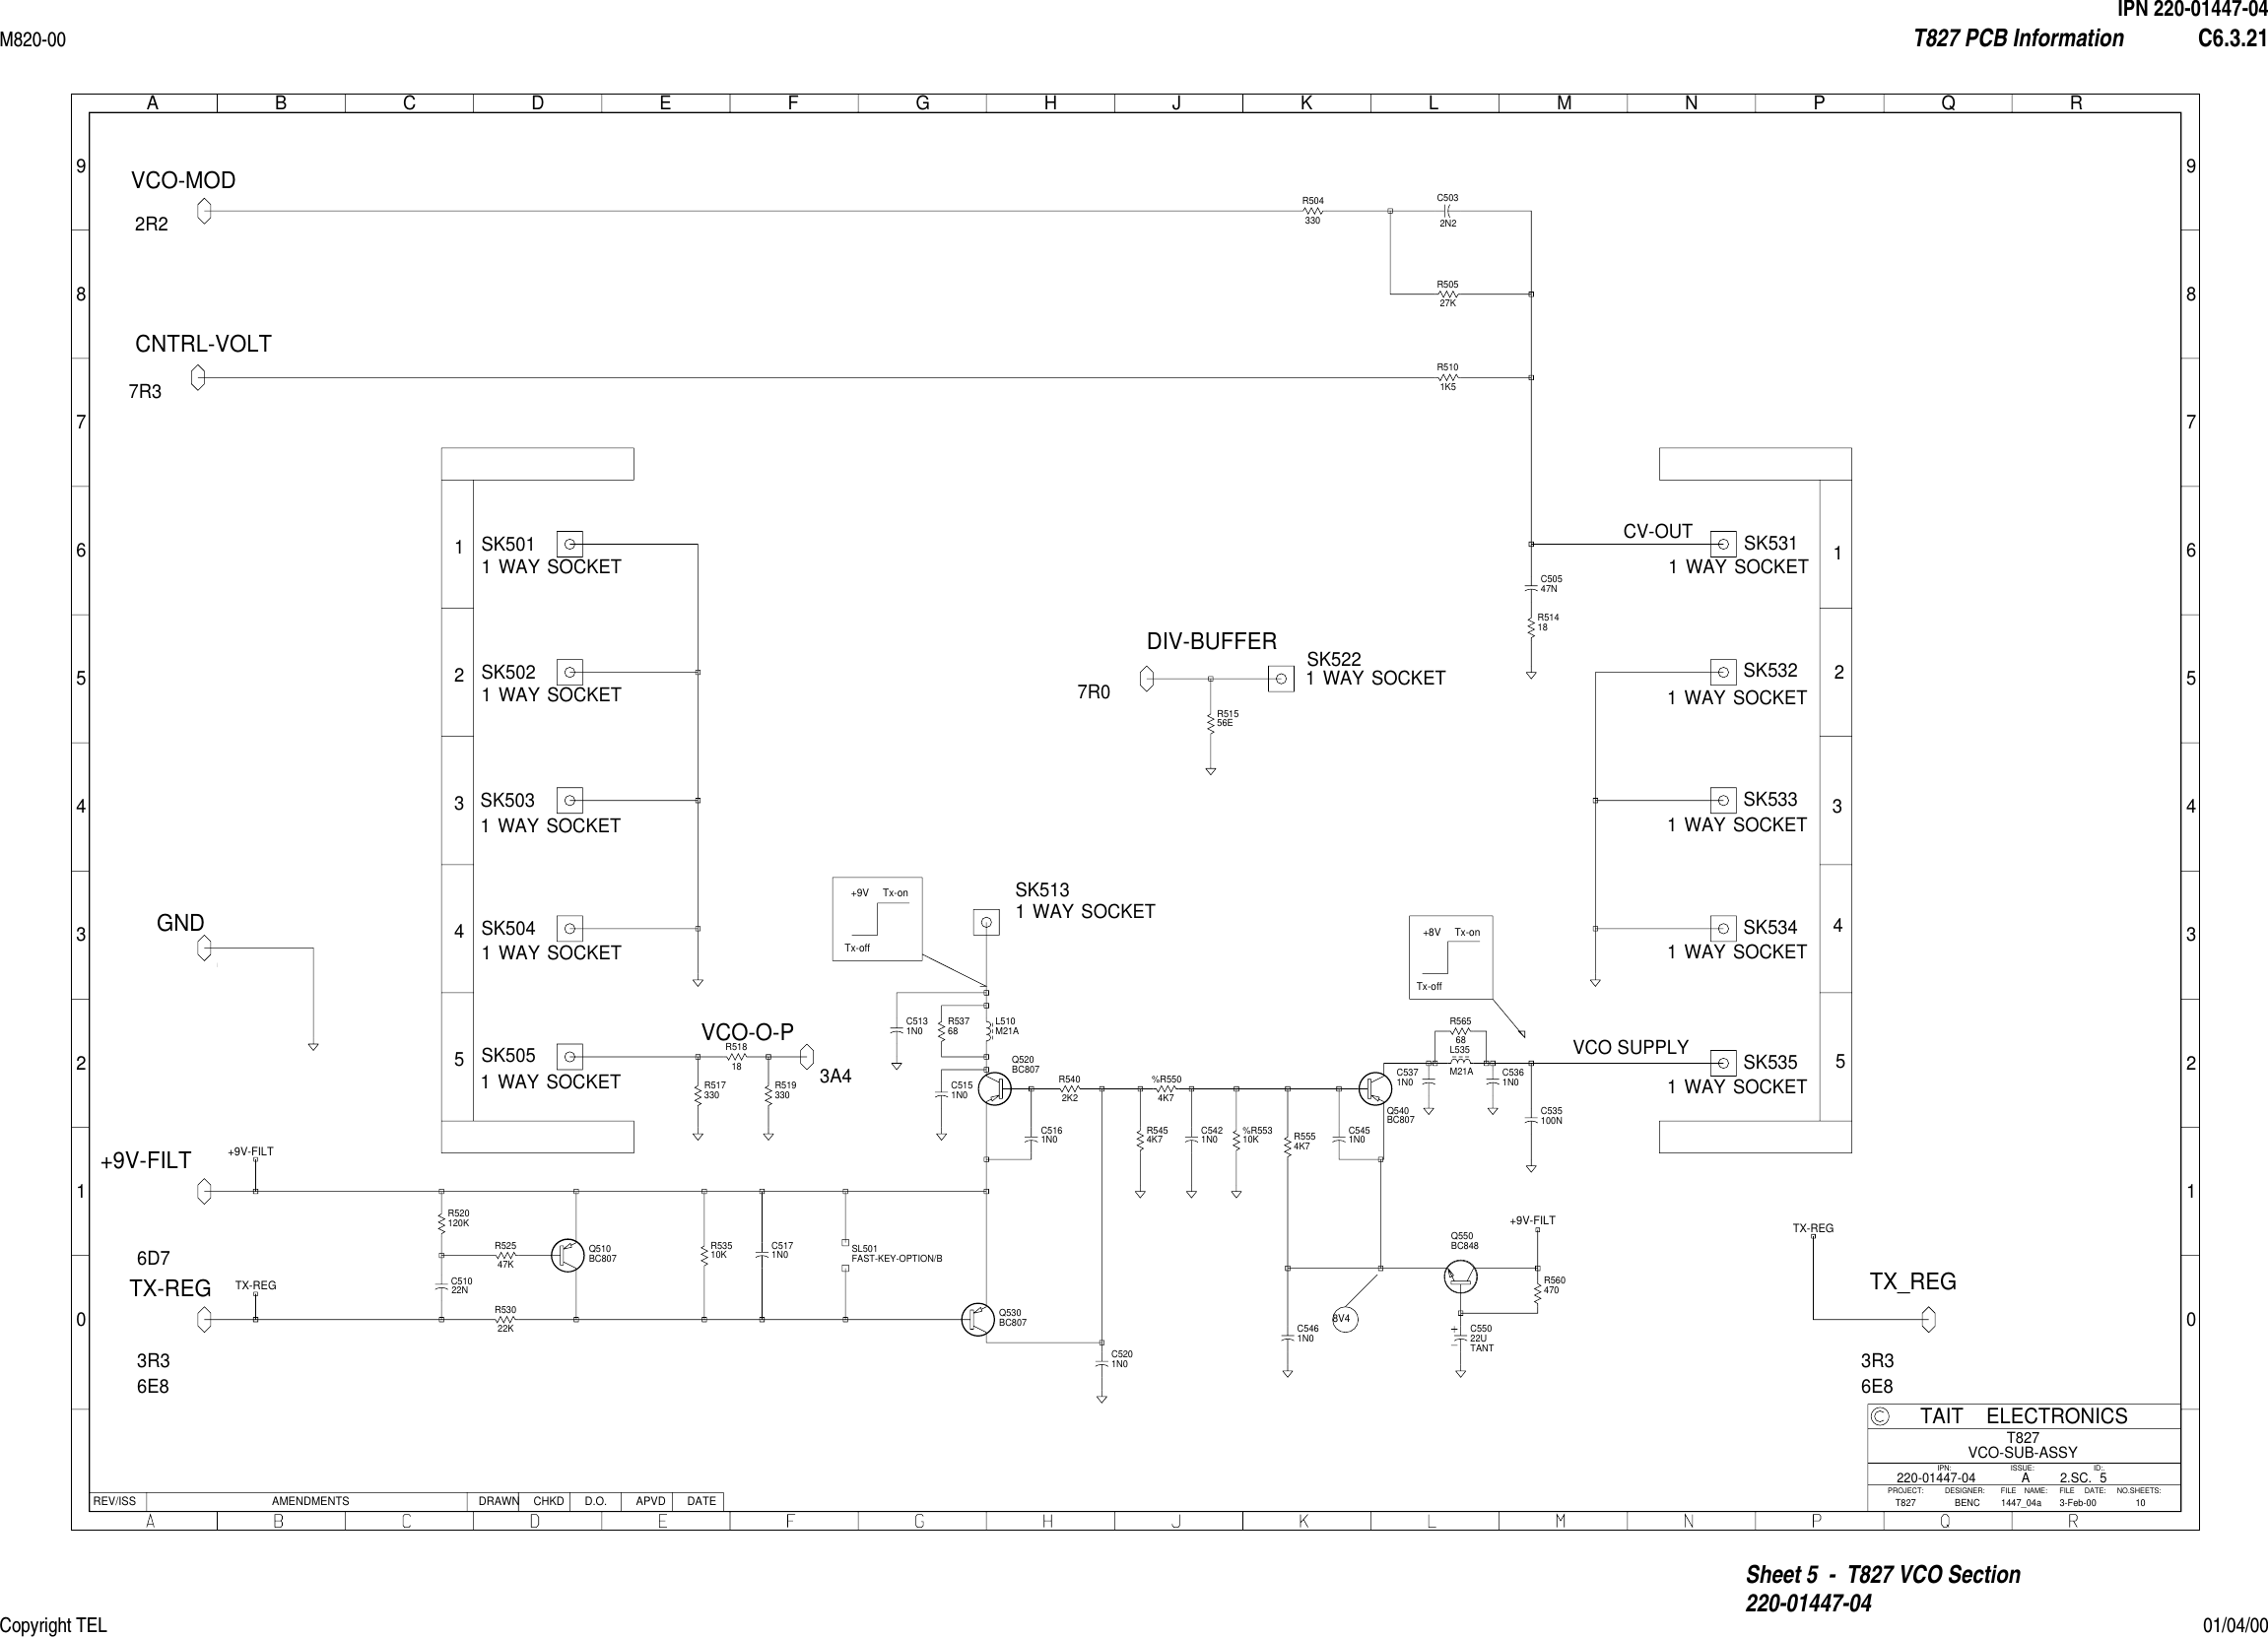 IPN 220-01447-04M820-00 T827 PCB Information C6.3.21Copyright TEL 01/04/00Sheet 5  -  T827 VCO Section220-01447-0401234567890123456789ABCDEFGHJ KLMNPQRREV/ISS AMENDMENTS DATEAPVDD.O.CHKDDRAWNNO.SHEETS:FILE NAME:TAIT ELECTRONICSIPN:FILE DATE:ISSUE: ID:.2.SC.PROJECT: DESIGNER:510T827VCO-SUB-ASSY1447_04a220-01447-043-Feb-00AT827 BENCSK5051 WAY SOCKET    SK5031 WAY SOCKET    SK5021 WAY SOCKET    SK5011 WAY SOCKET    SK5131 WAY SOCKET    SK5221 WAY SOCKET    SK5041 WAY SOCKET    SK5311 WAY SOCKET    CV-OUTSK5341 WAY SOCKET    SK5331 WAY SOCKET    SK5321 WAY SOCKET    SK5351 WAY SOCKET    VCO SUPPLYR520120K    C51022N    R52547K    R53510K    R53022K    SL501R5402K2    R5454K7    %R5504K7    R5554K7    R560470    C5131N0    C535100N    C5032N2    R50527K    R504330    R51556E    R5101K5    C50547N    Q520BC807    Q530BC807    Q510BC807    Q540BC807    Q550BC848    R51818     R519330    R517330    R51418    C5171N0    C5161N0    C5451N0    C5461N0     TANTC55022U    %R55310K    L535M21A    C5371N0     C5361N0    L510M21A    R53768    C5151N0    C5201N0    C5421N0    R56568    GND1R01R02R33R84G46B07A48A09C5VCO-O-P3A4DIV-BUFFER7R0VCO-MOD2R2CNTRL-VOLT7R3+9V-FILTTX-REG3R36E8+9V-FILT6D7+9V-FILTTX_REG3R36E8TX-REGTX-REG1234512345FAST-KEY-OPTION/B+9V Tx-on8V4Tx-off+8V Tx-onTx-off